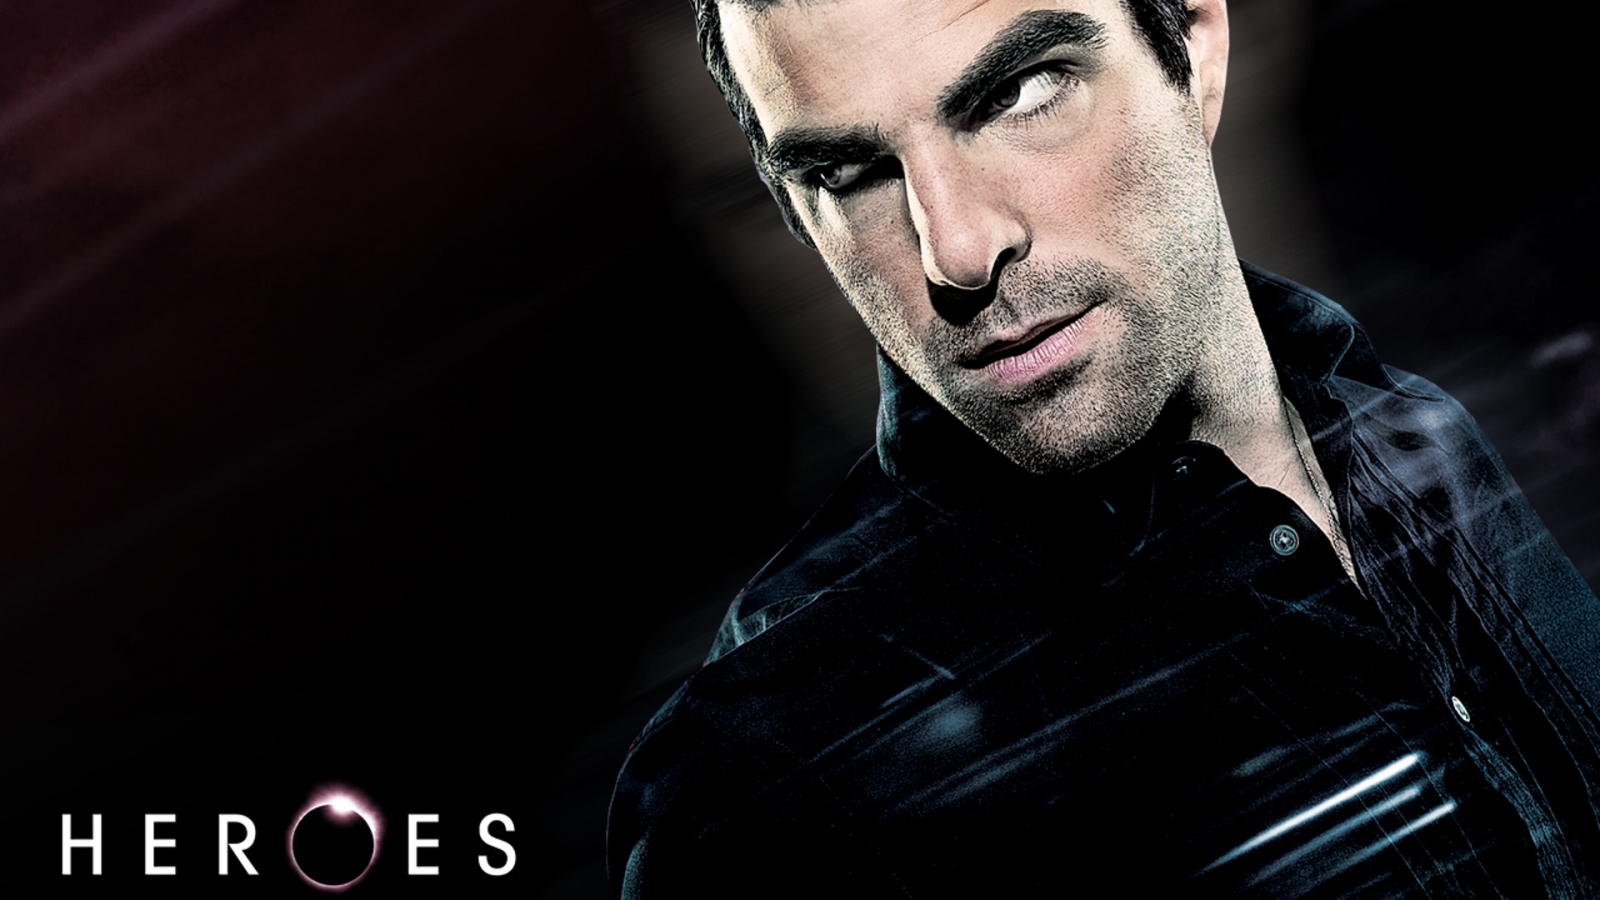 Heroes Sylar for 1600 x 900 HDTV resolution